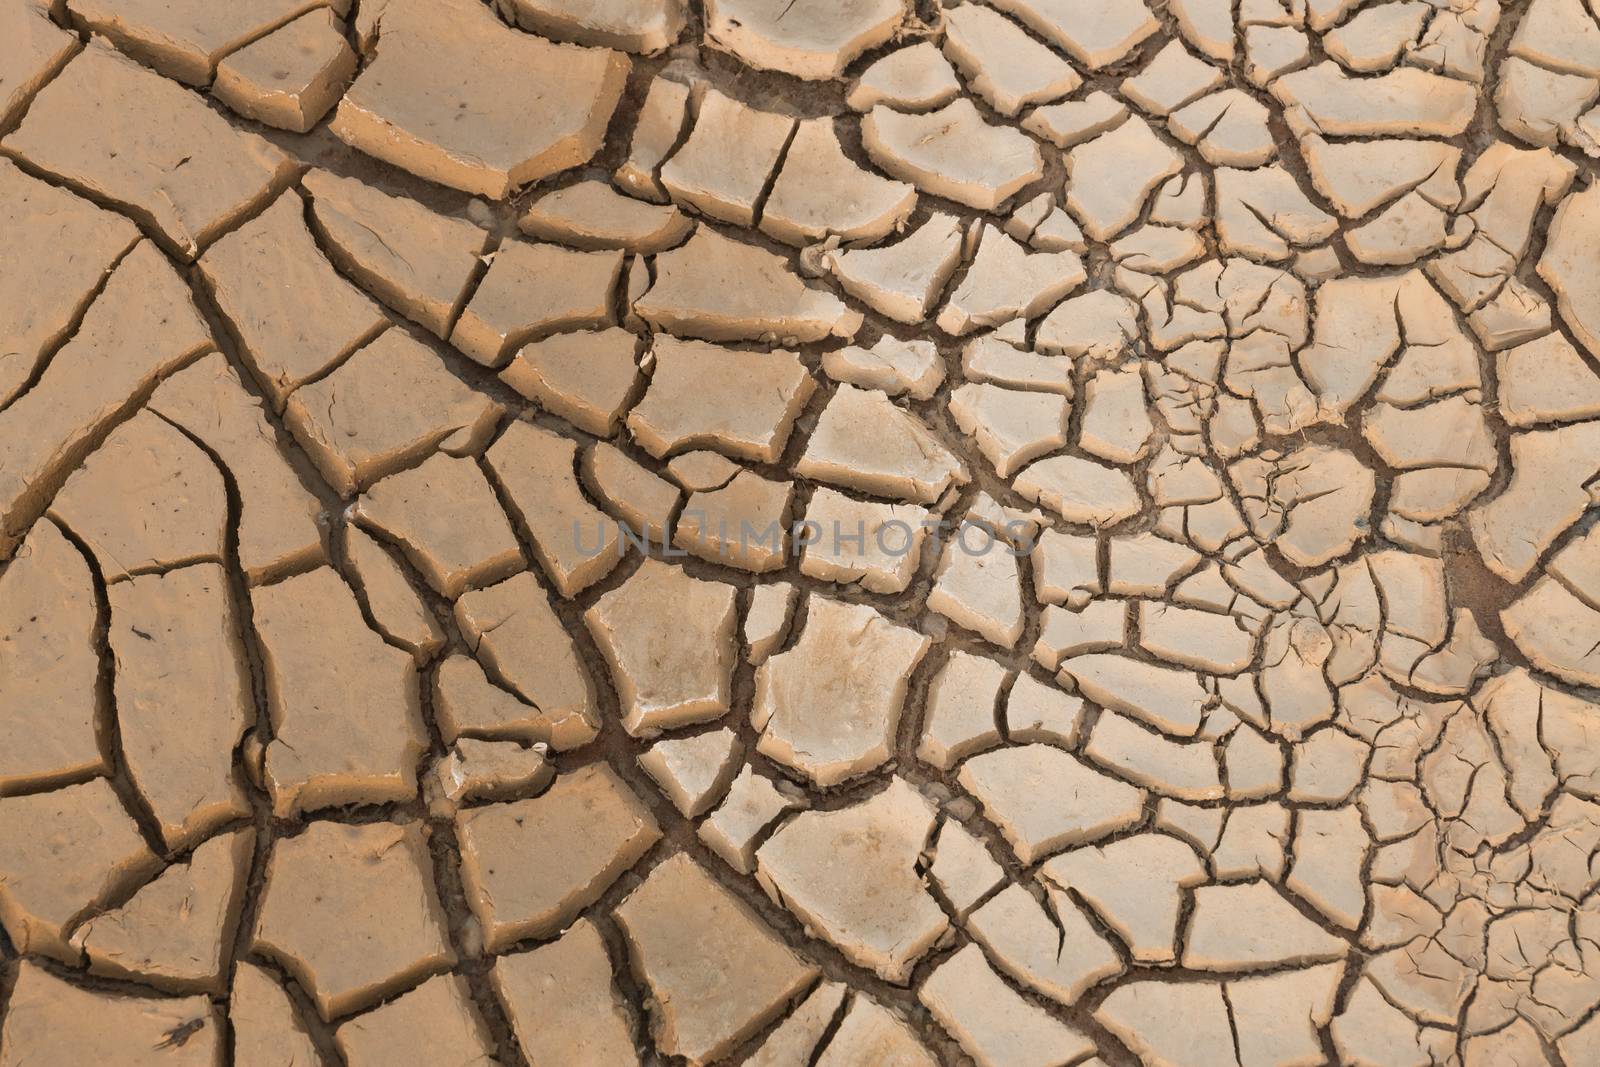 Dry cracked earth.